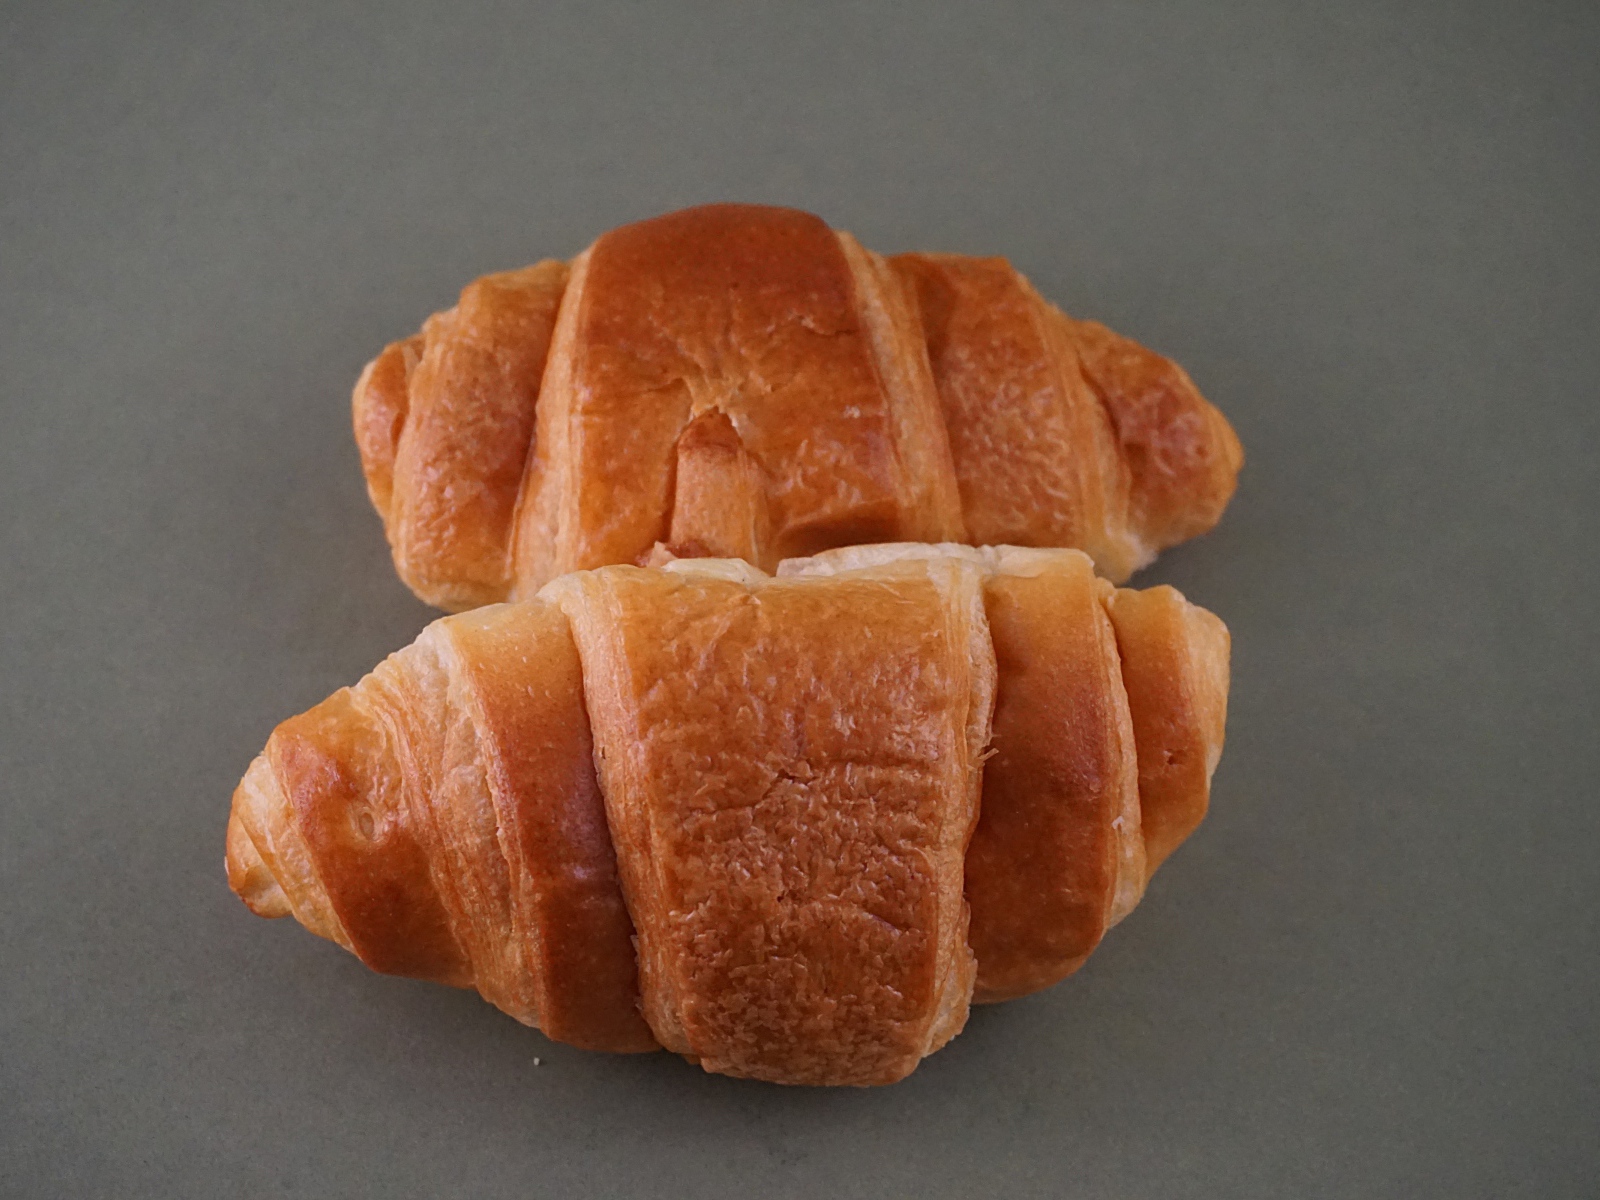 Two fresh croissants on a gray surface